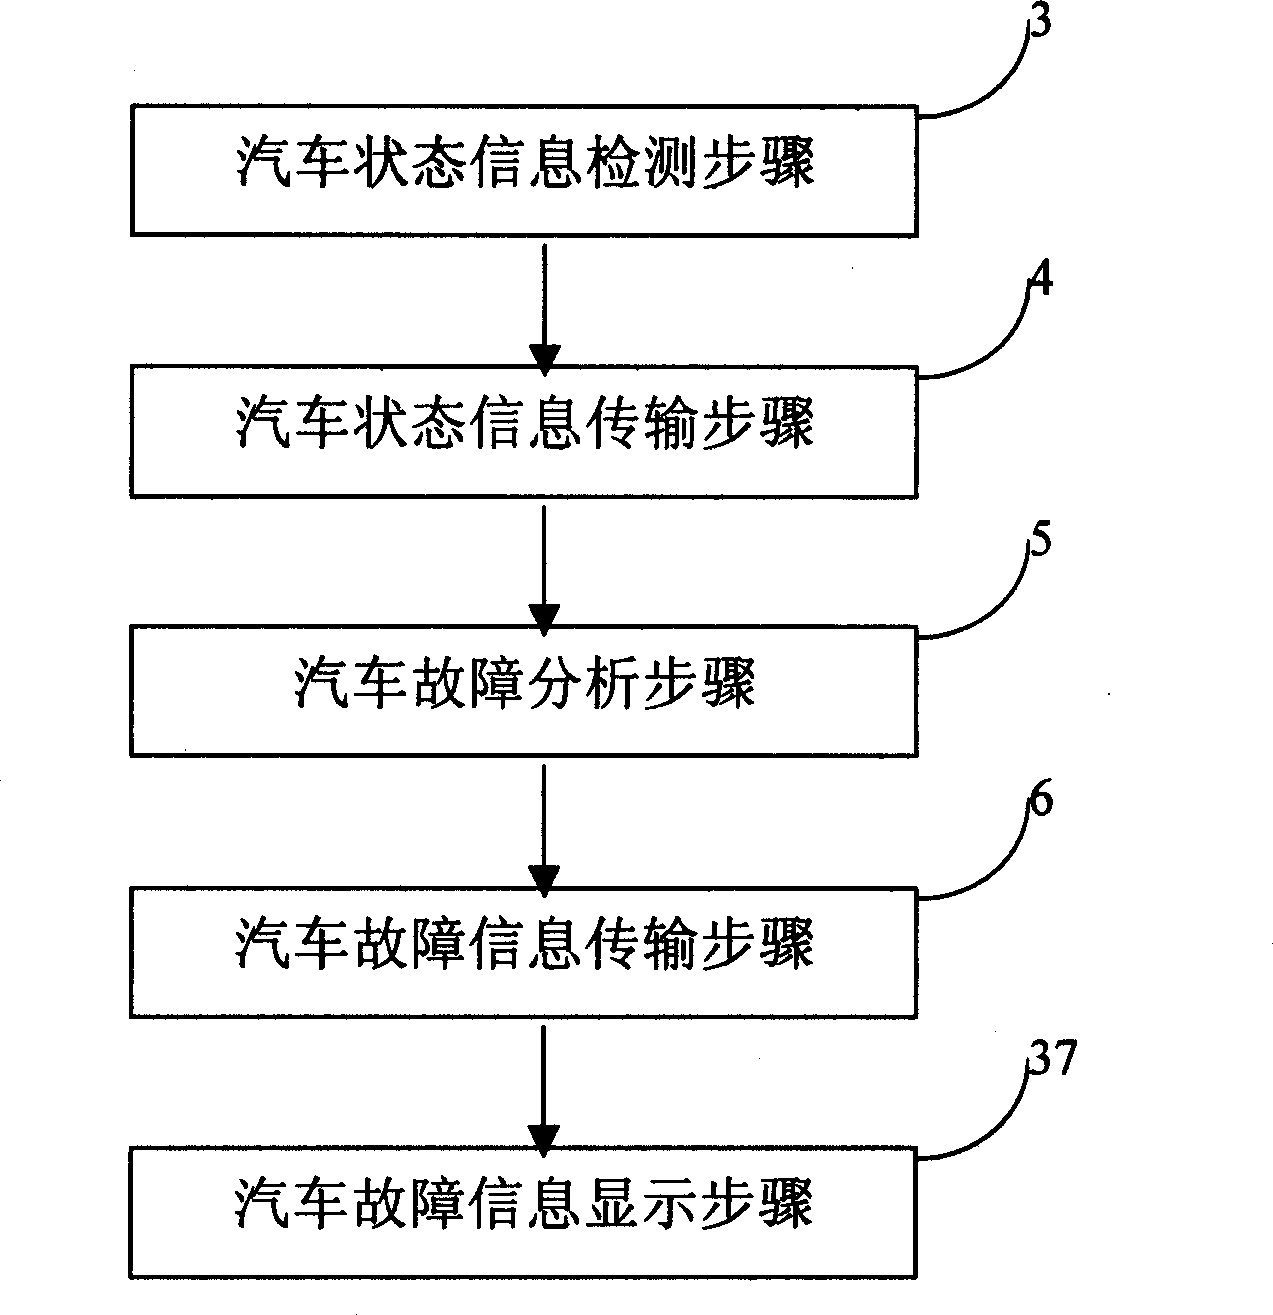 Car fault auto-detecting system and method